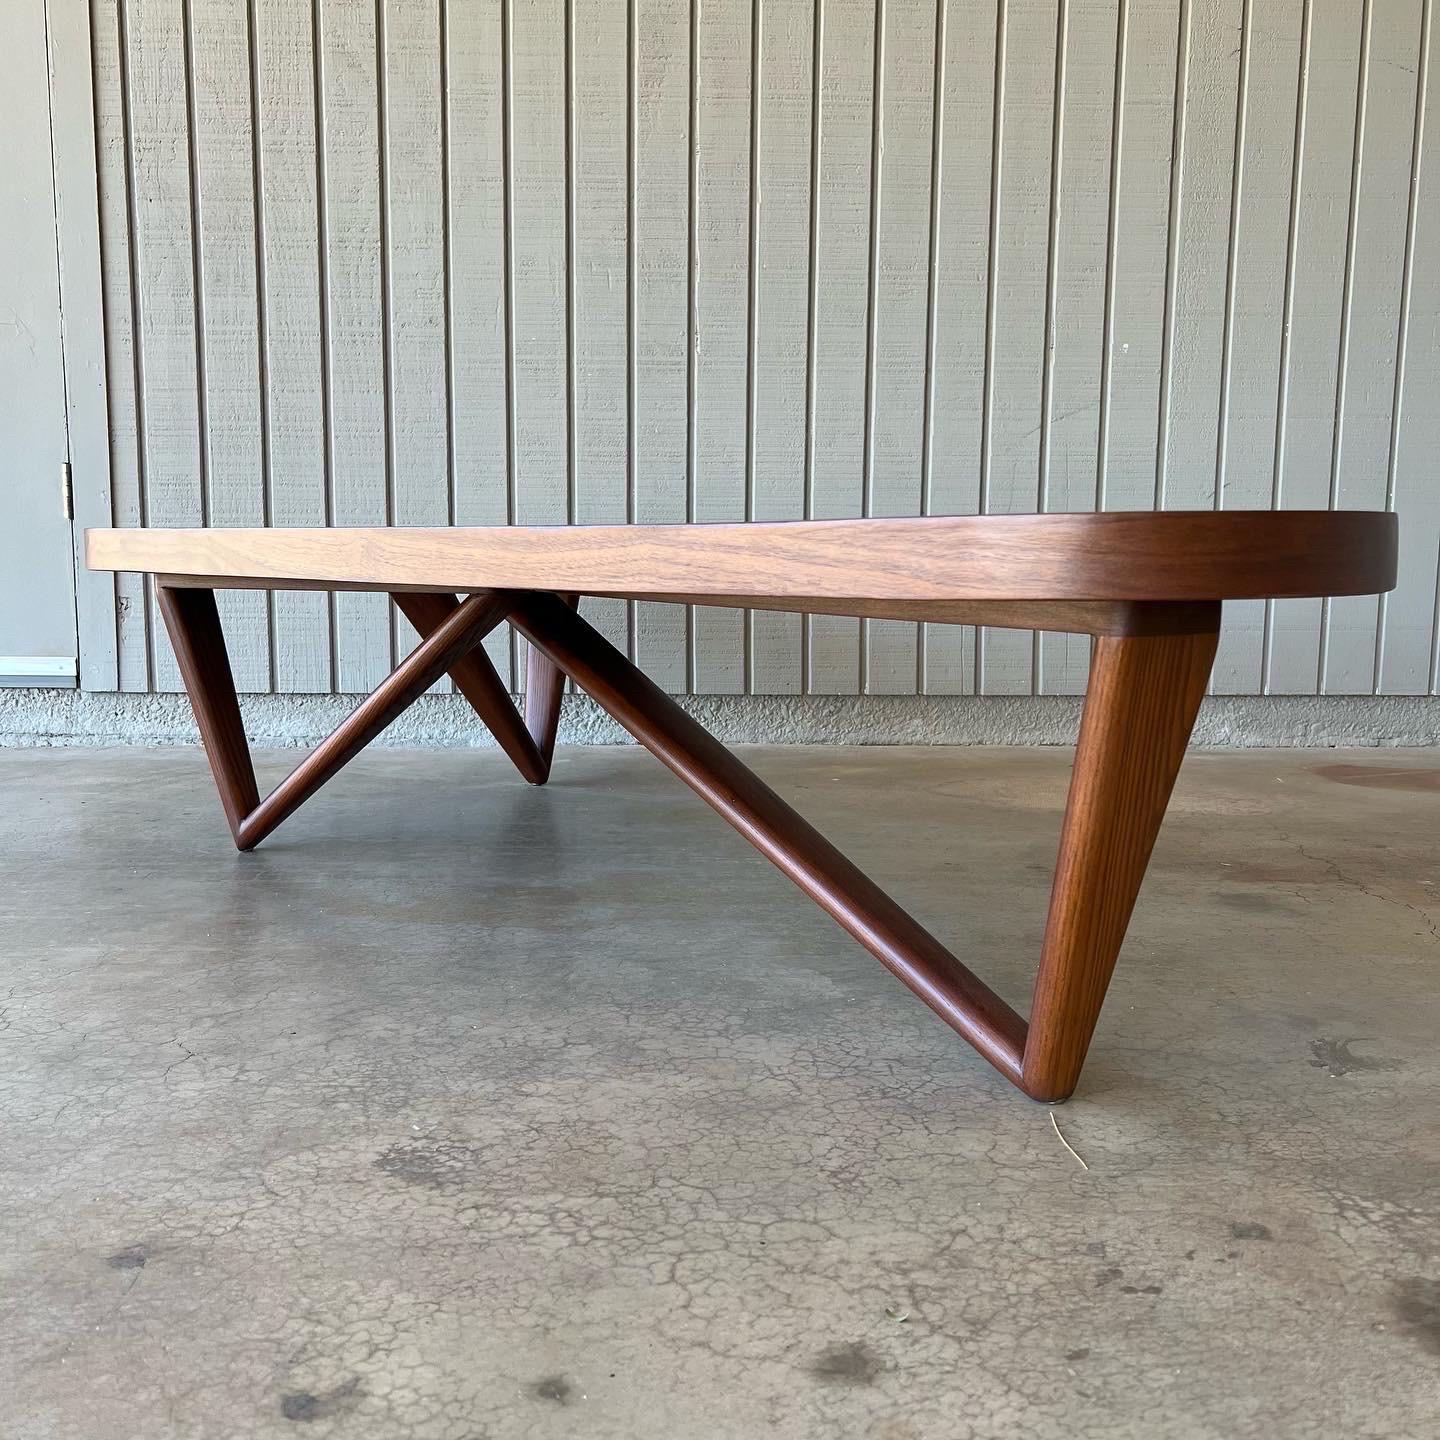 Mid-20th Century Mid-Century Modern Boomerang or Kidney Shaped Wood Coffee or Cocktail Table For Sale